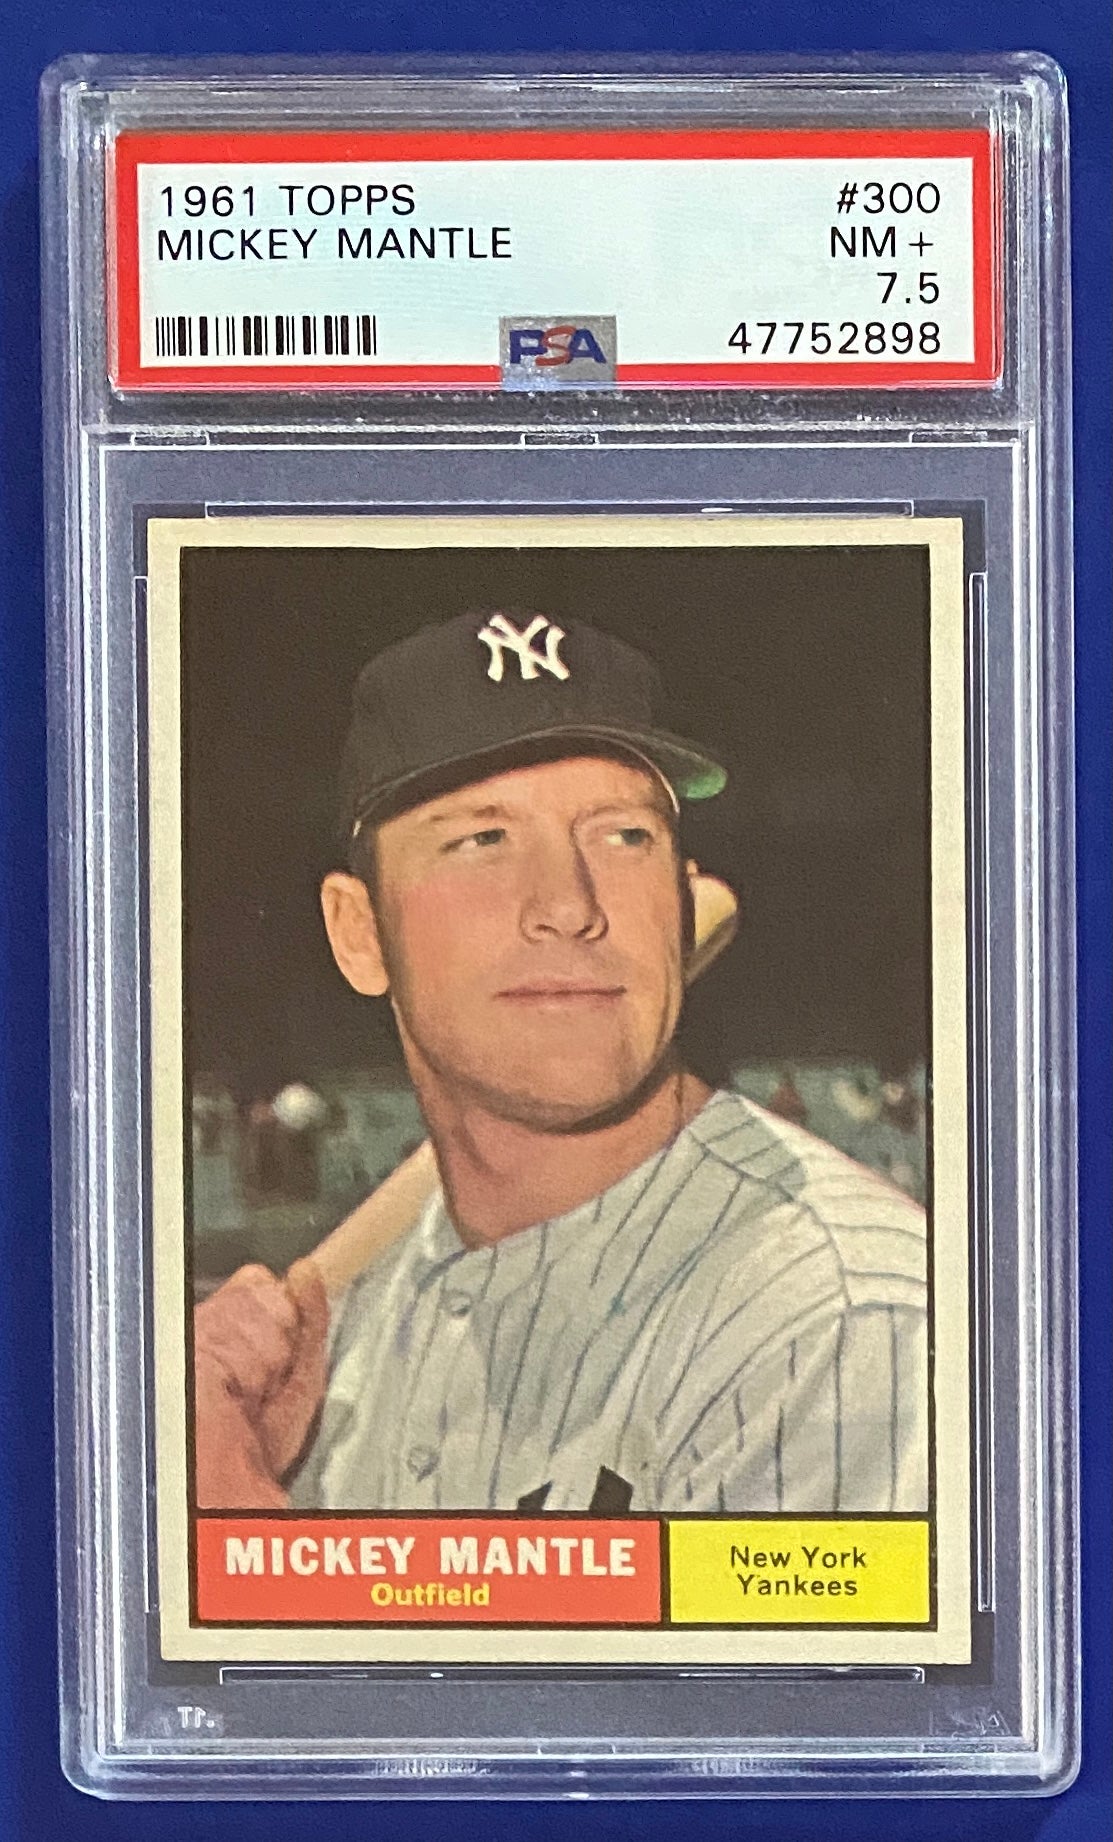 Mickey Mantle 1961 Topps PSA 7.5 PWCC TOP 30%